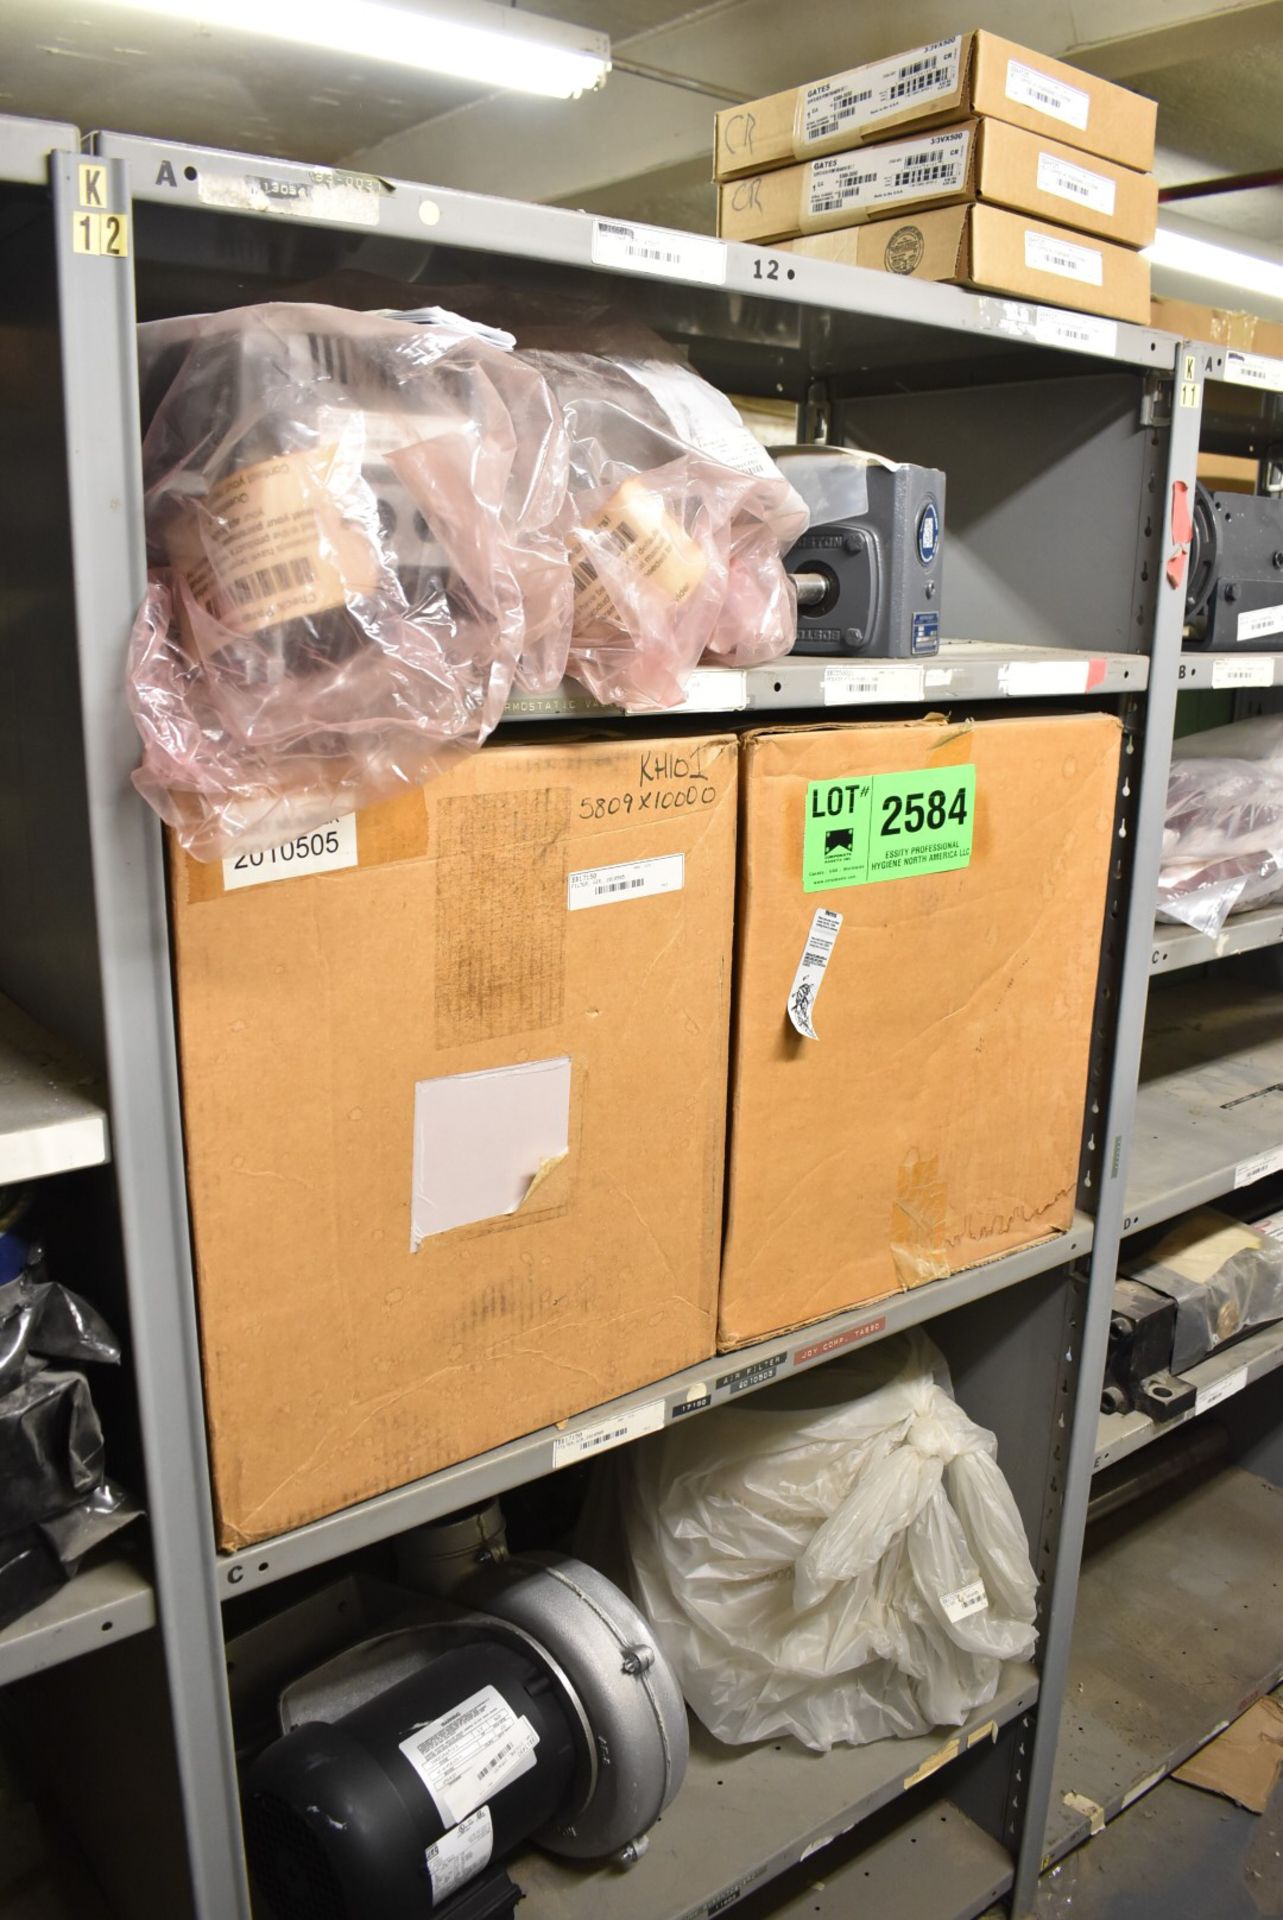 LOT/ CONTENTS OF SHELF - INCLUDING (2) SCHNEIDER ELECTRIC VECTOR DRIVES, REDUCER, AIR FILTERS,